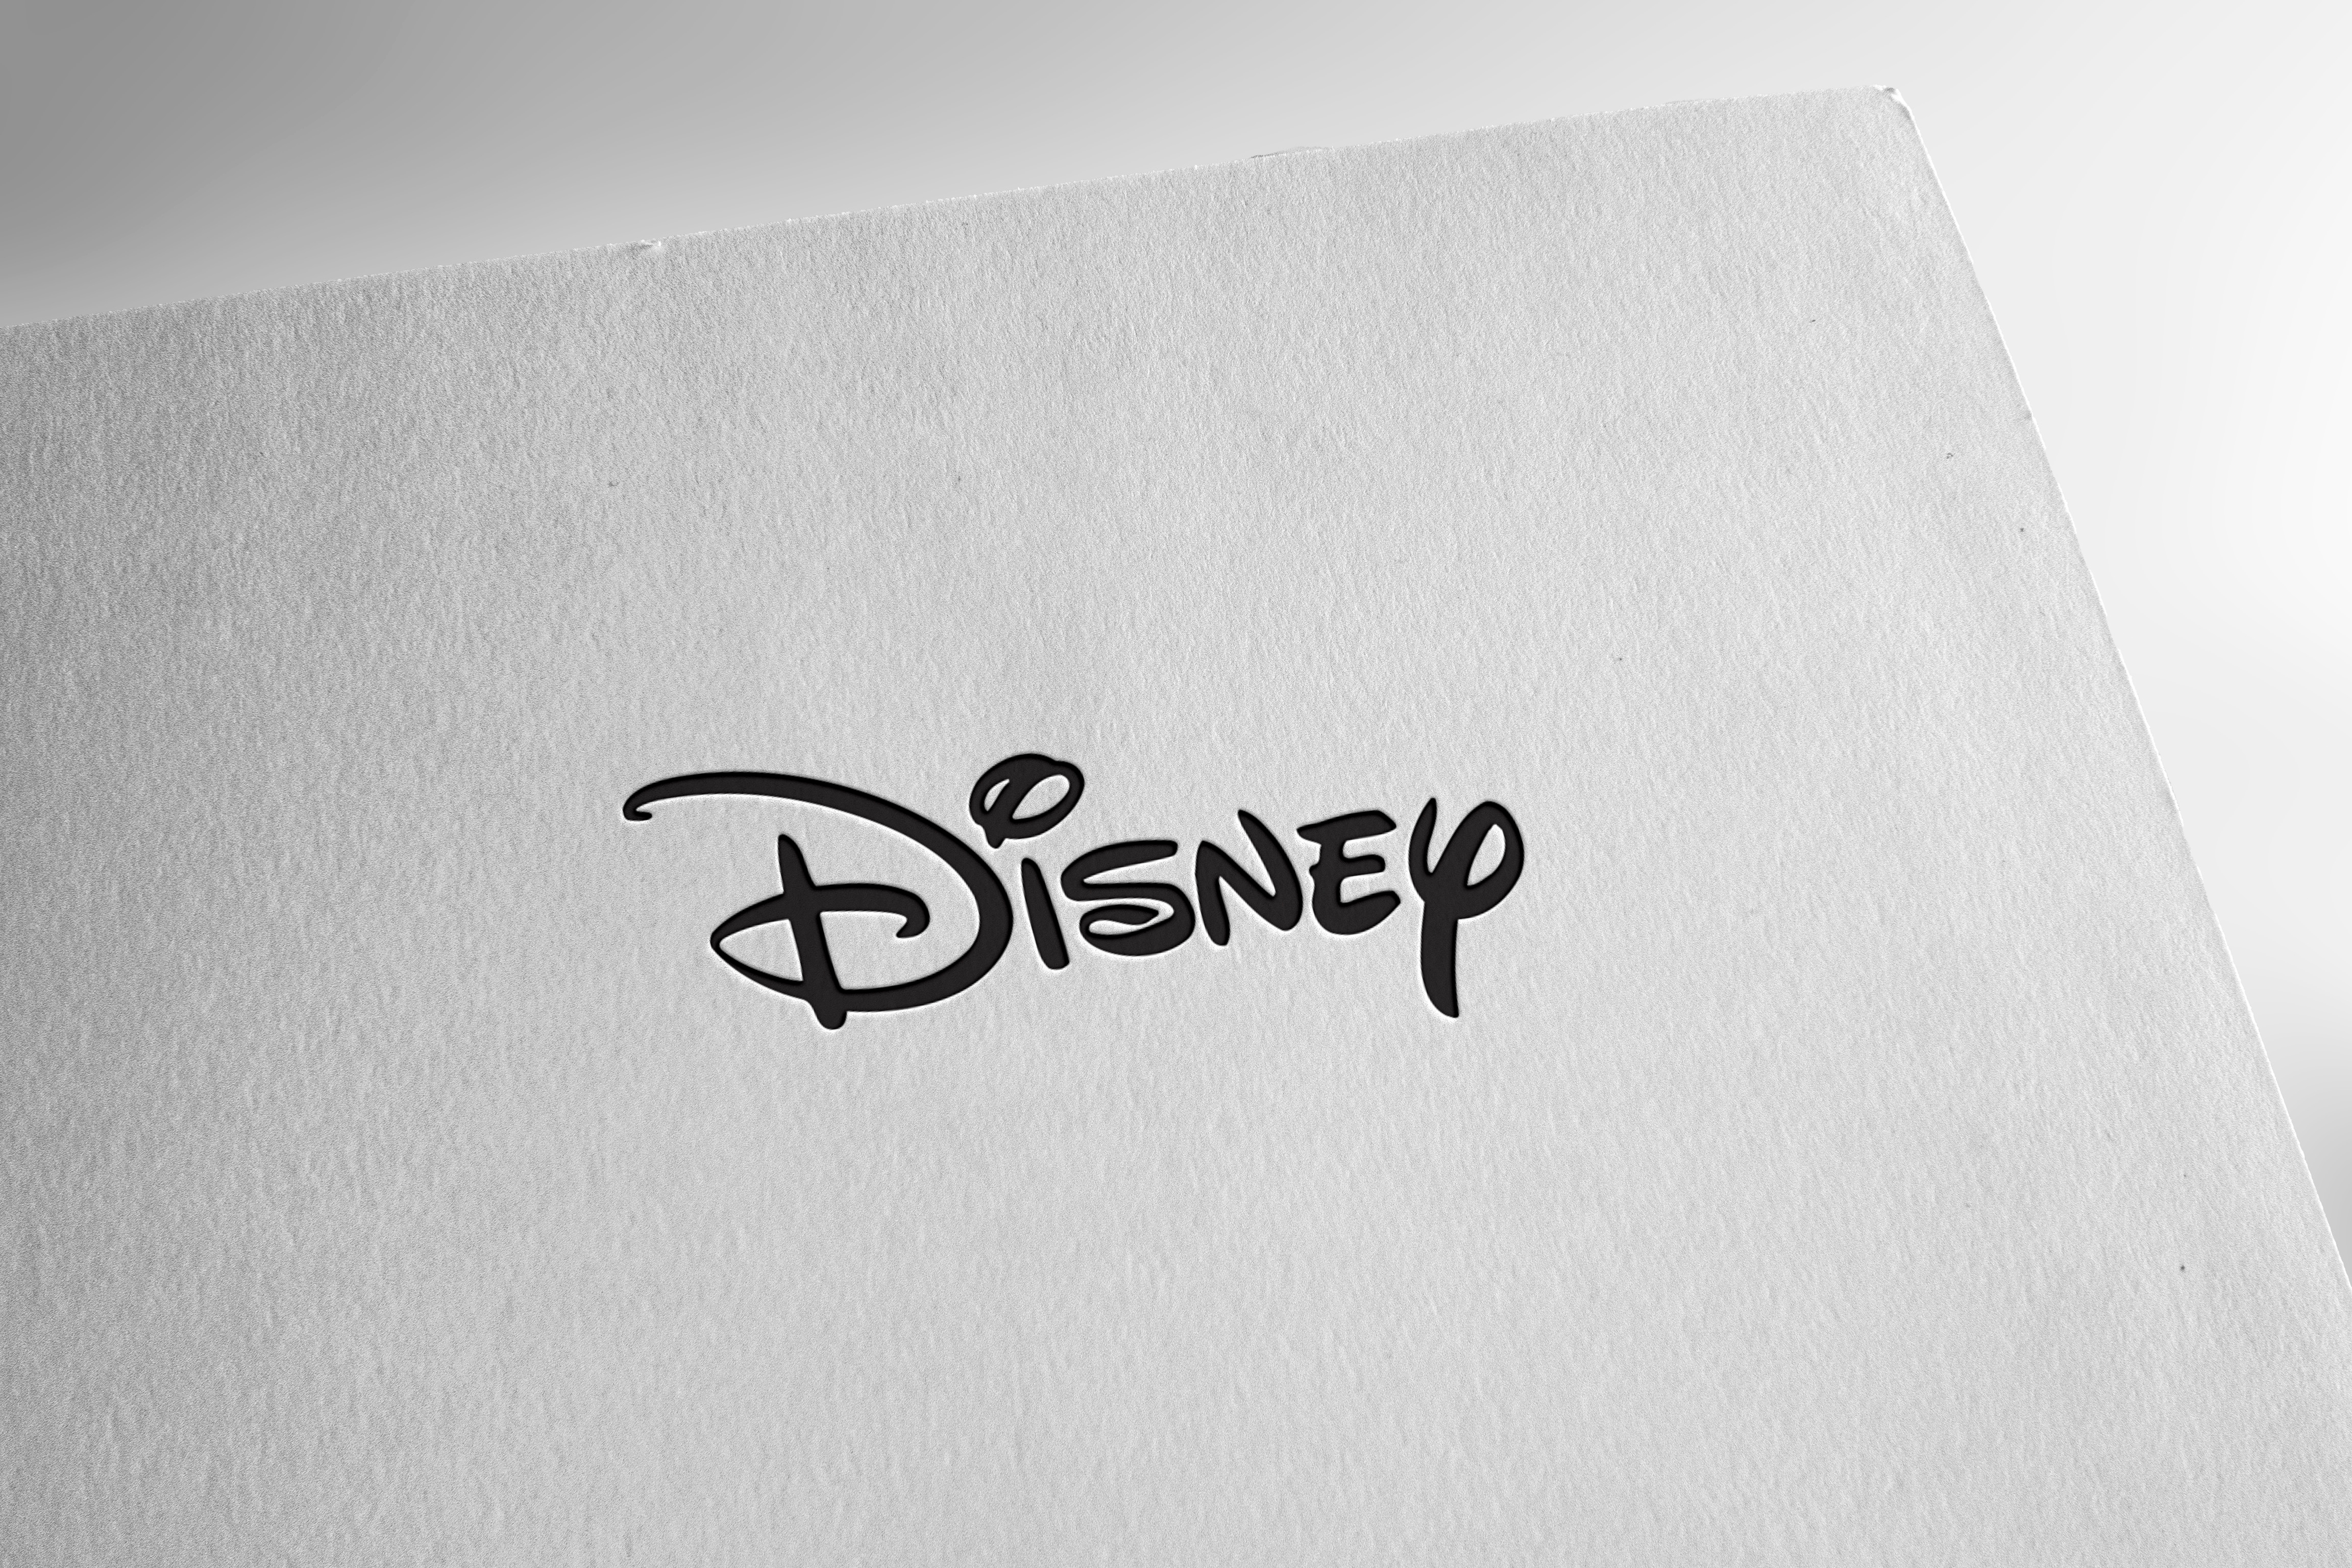 Investago | Disney's Growth Potential - Buy Now?